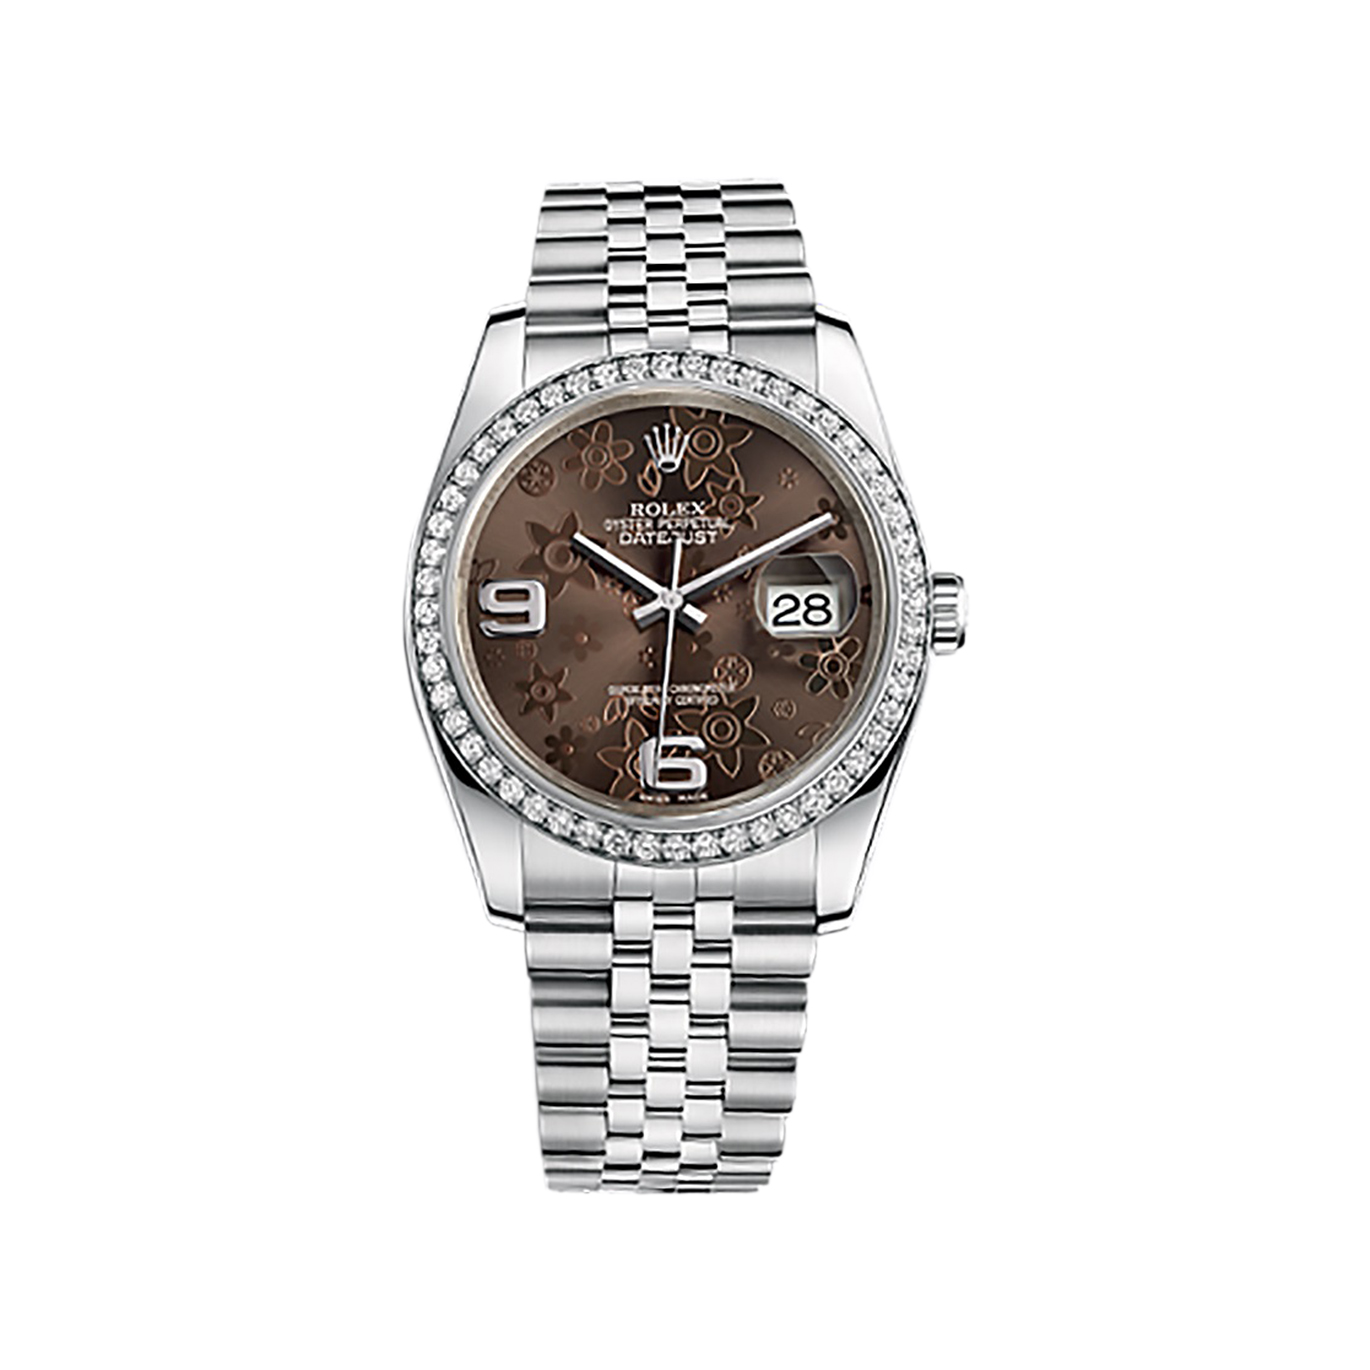 Datejust 36 116244 White Gold & Stainless Steel Watch (Bronze Floral Motif) - Click Image to Close